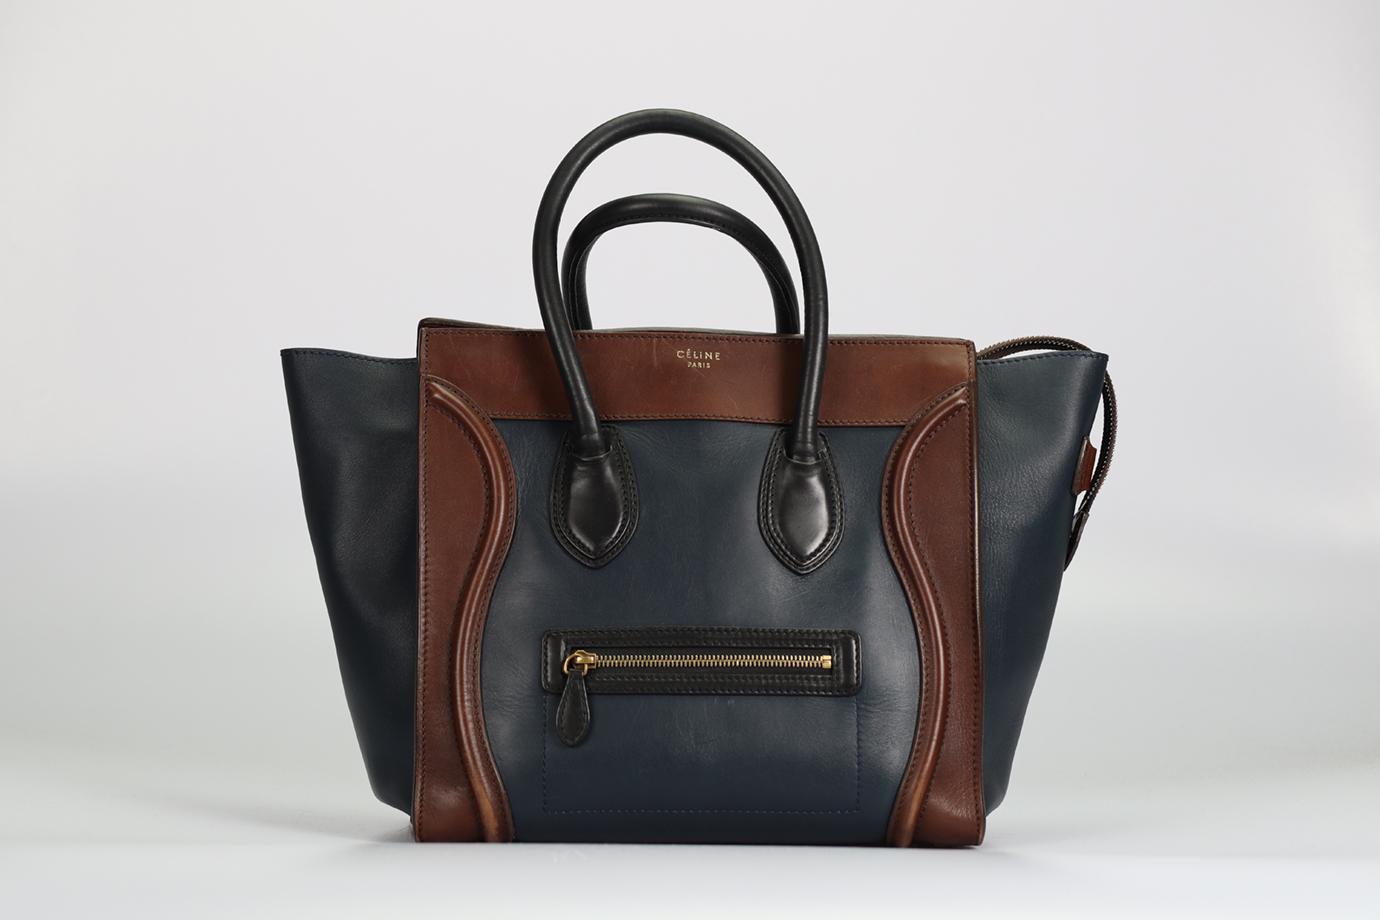 Celine Luggage Mini Leather Tote Bag In Good Condition For Sale In London, GB